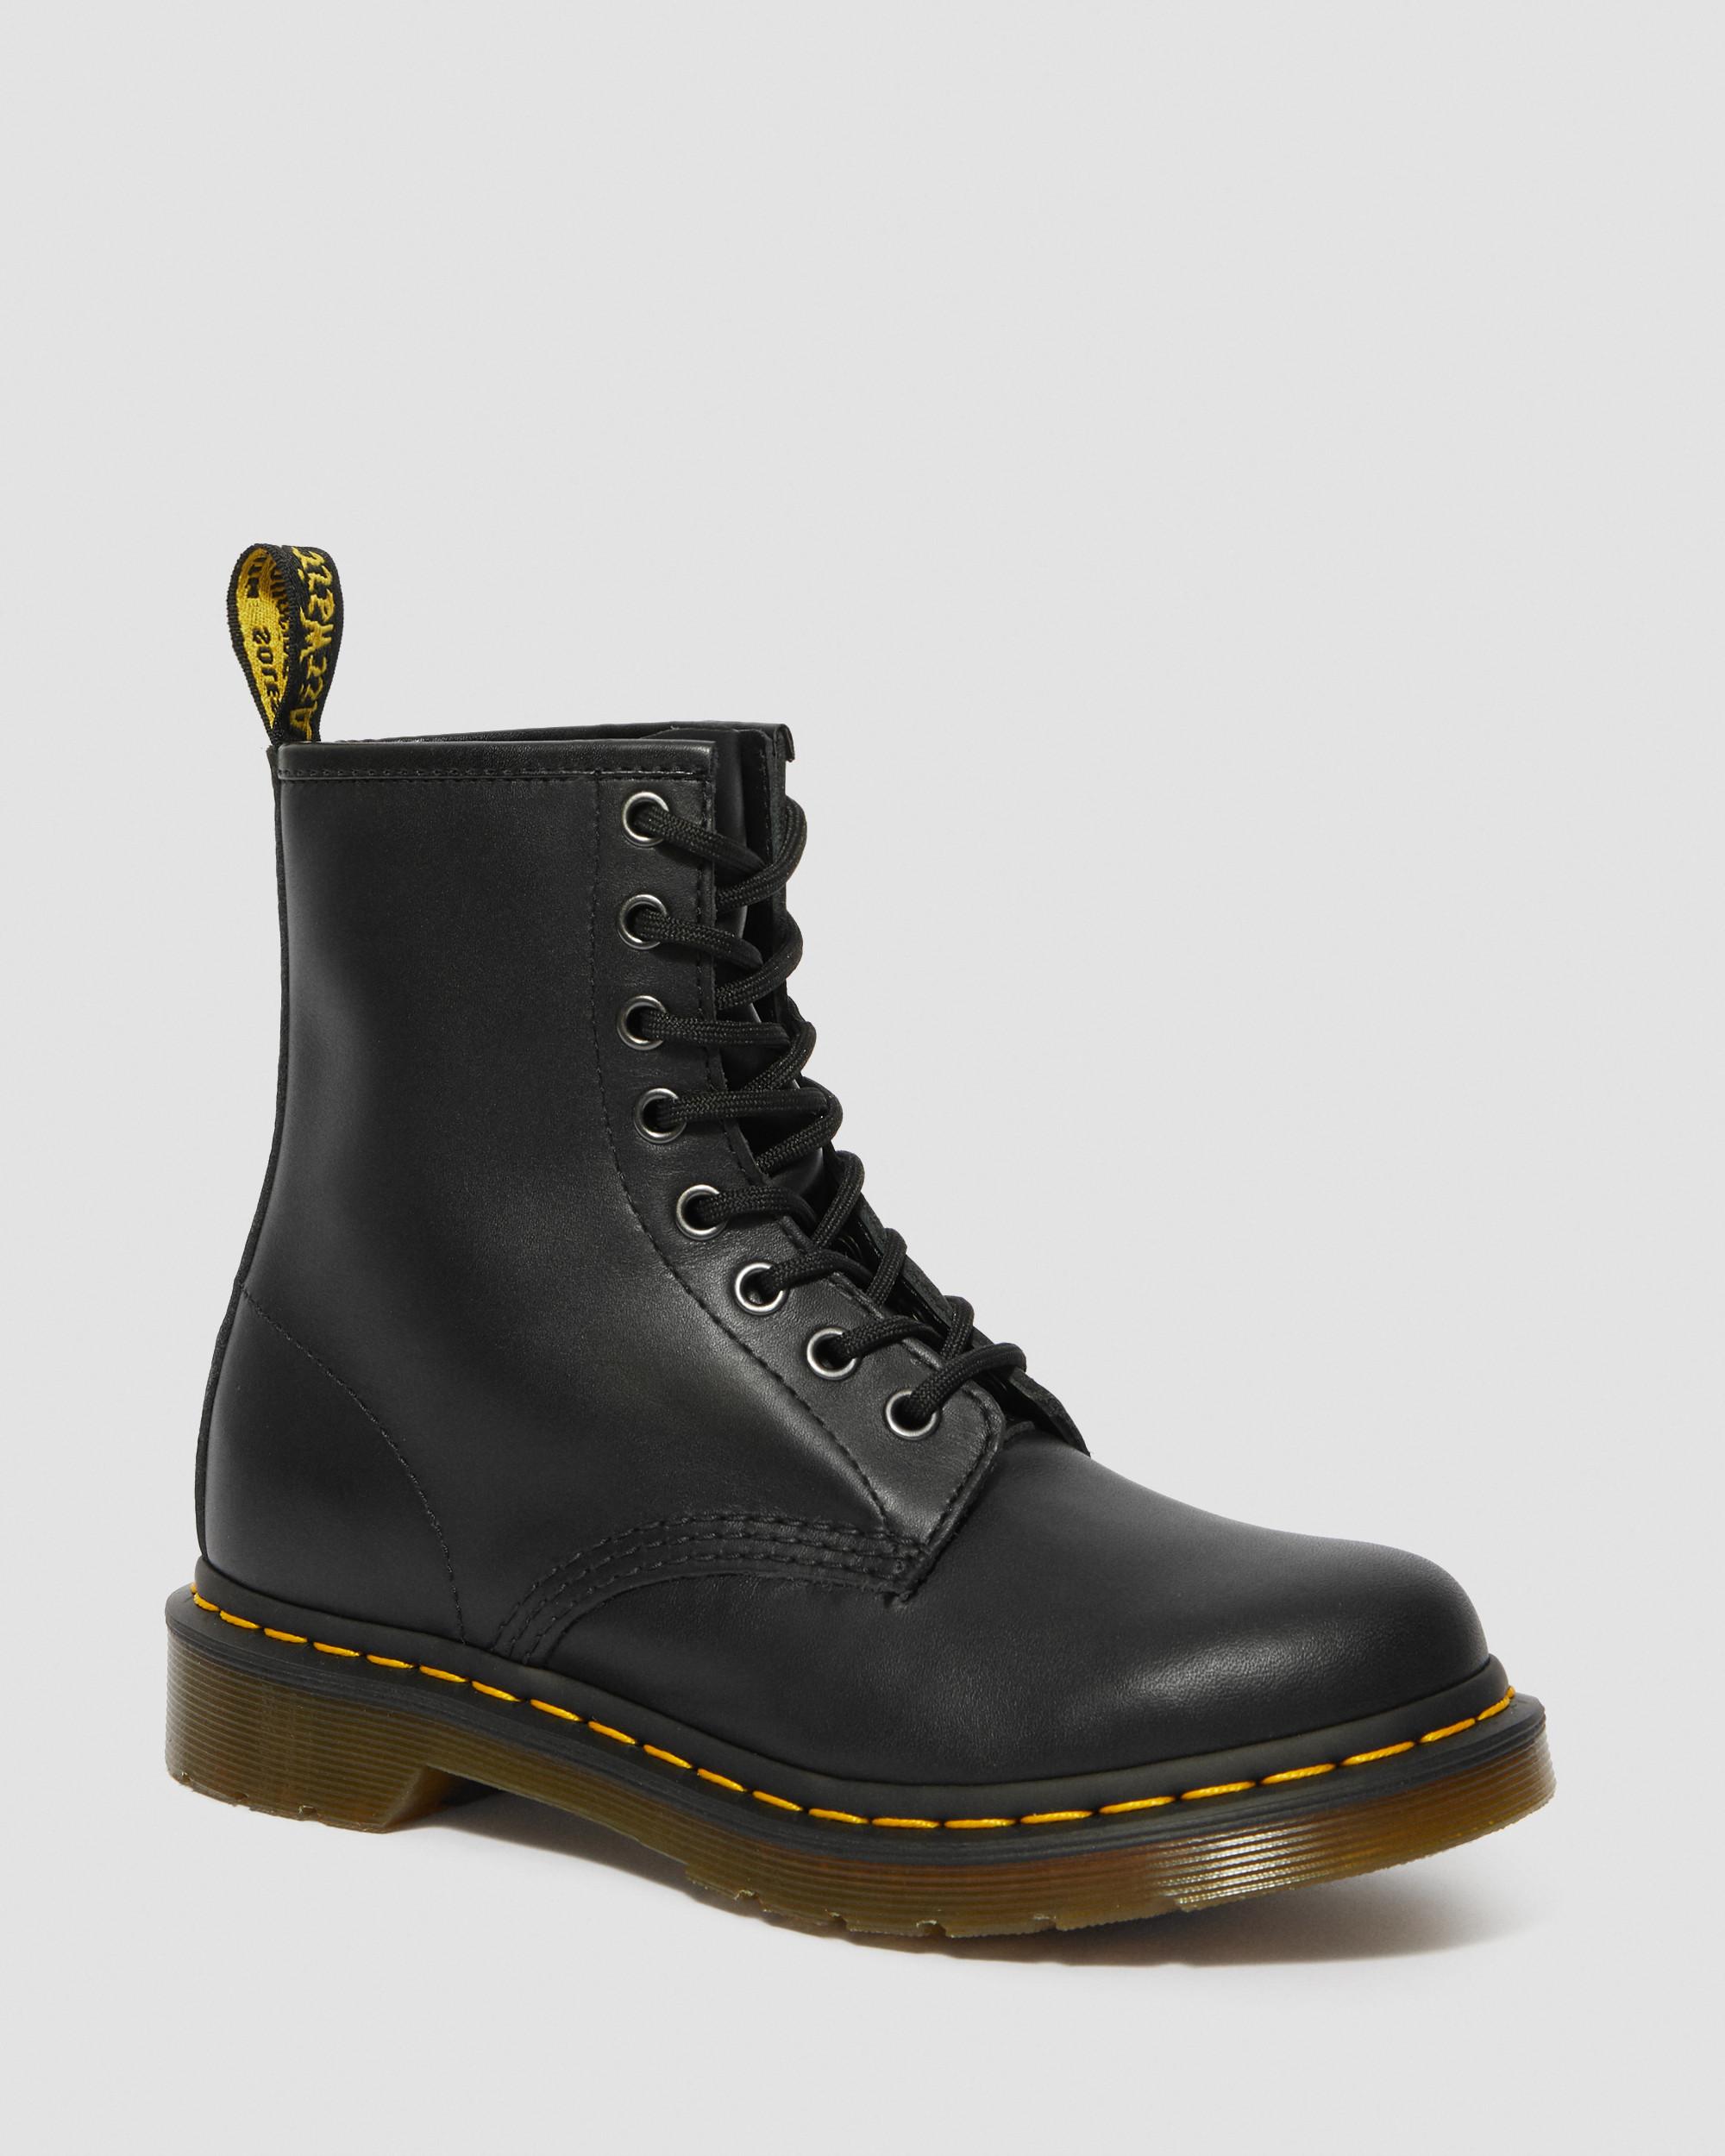 1460 Women's Nappa Leather Lace Up Boots in Black | Dr. Martens